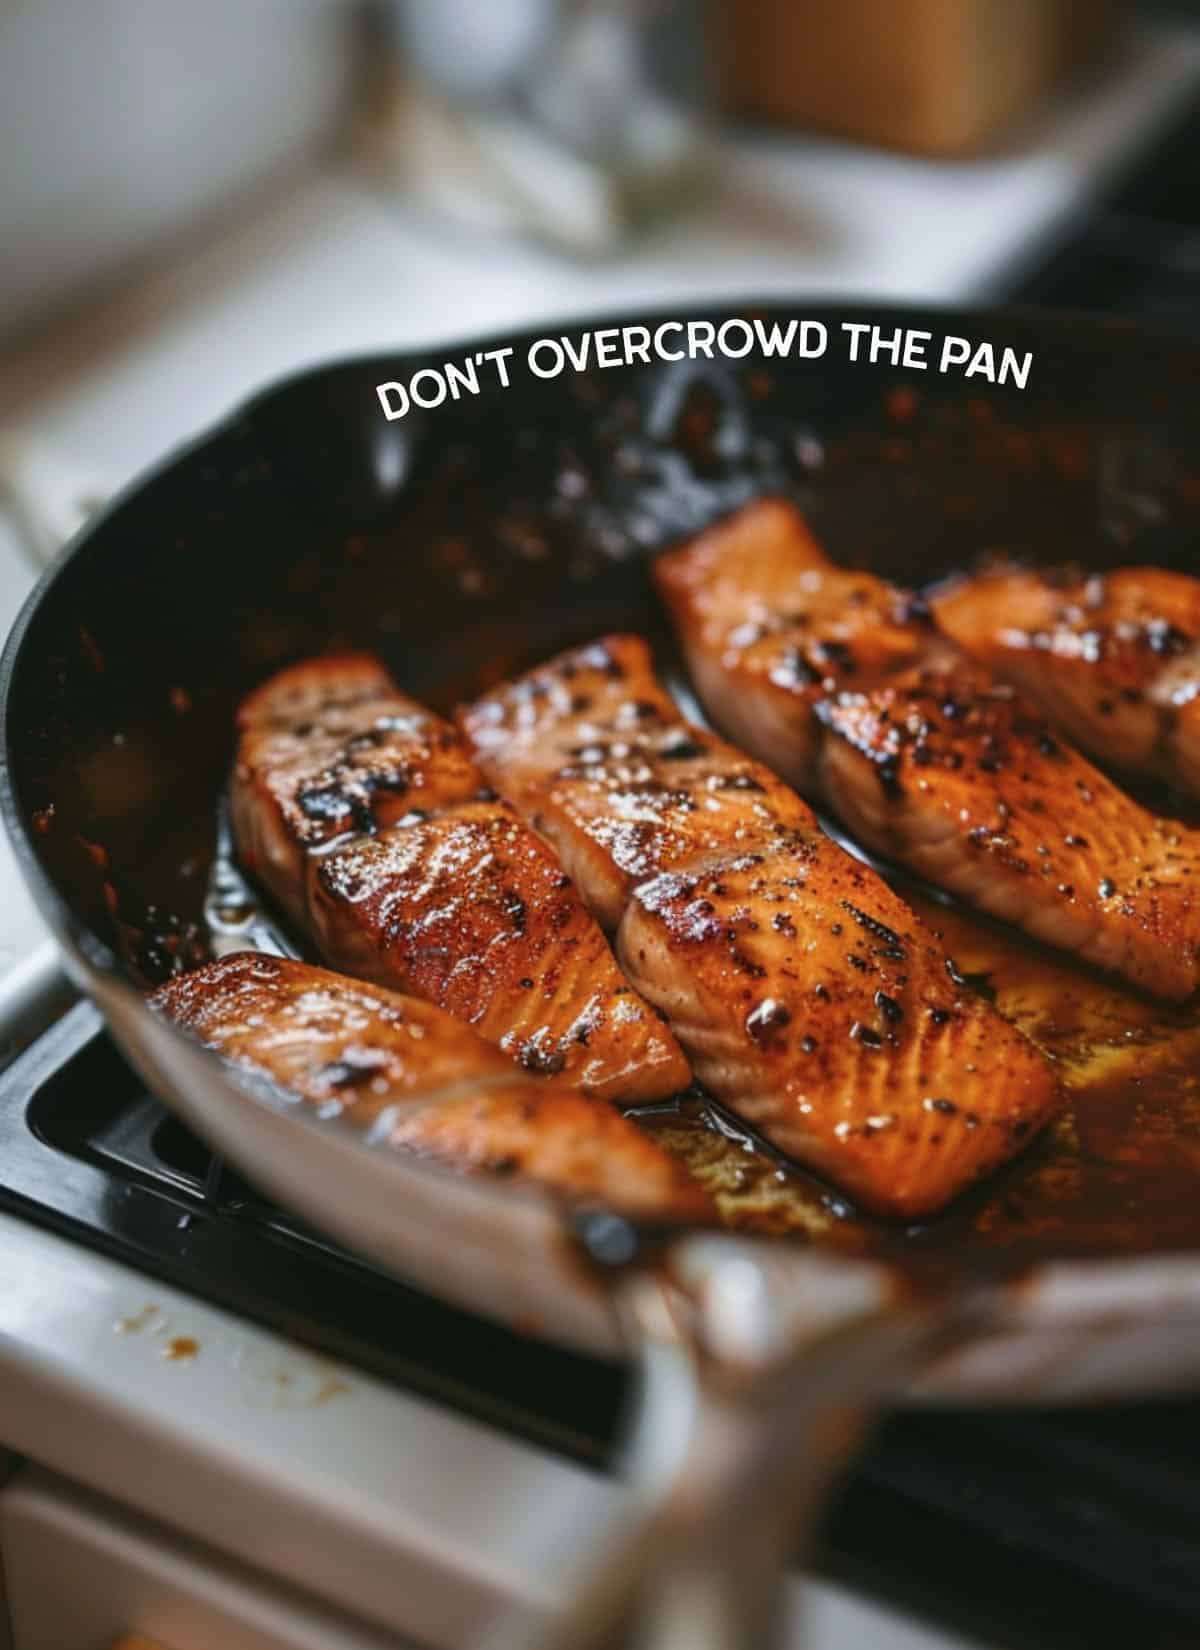 Image of an overcrowded pan with salmon fillets.